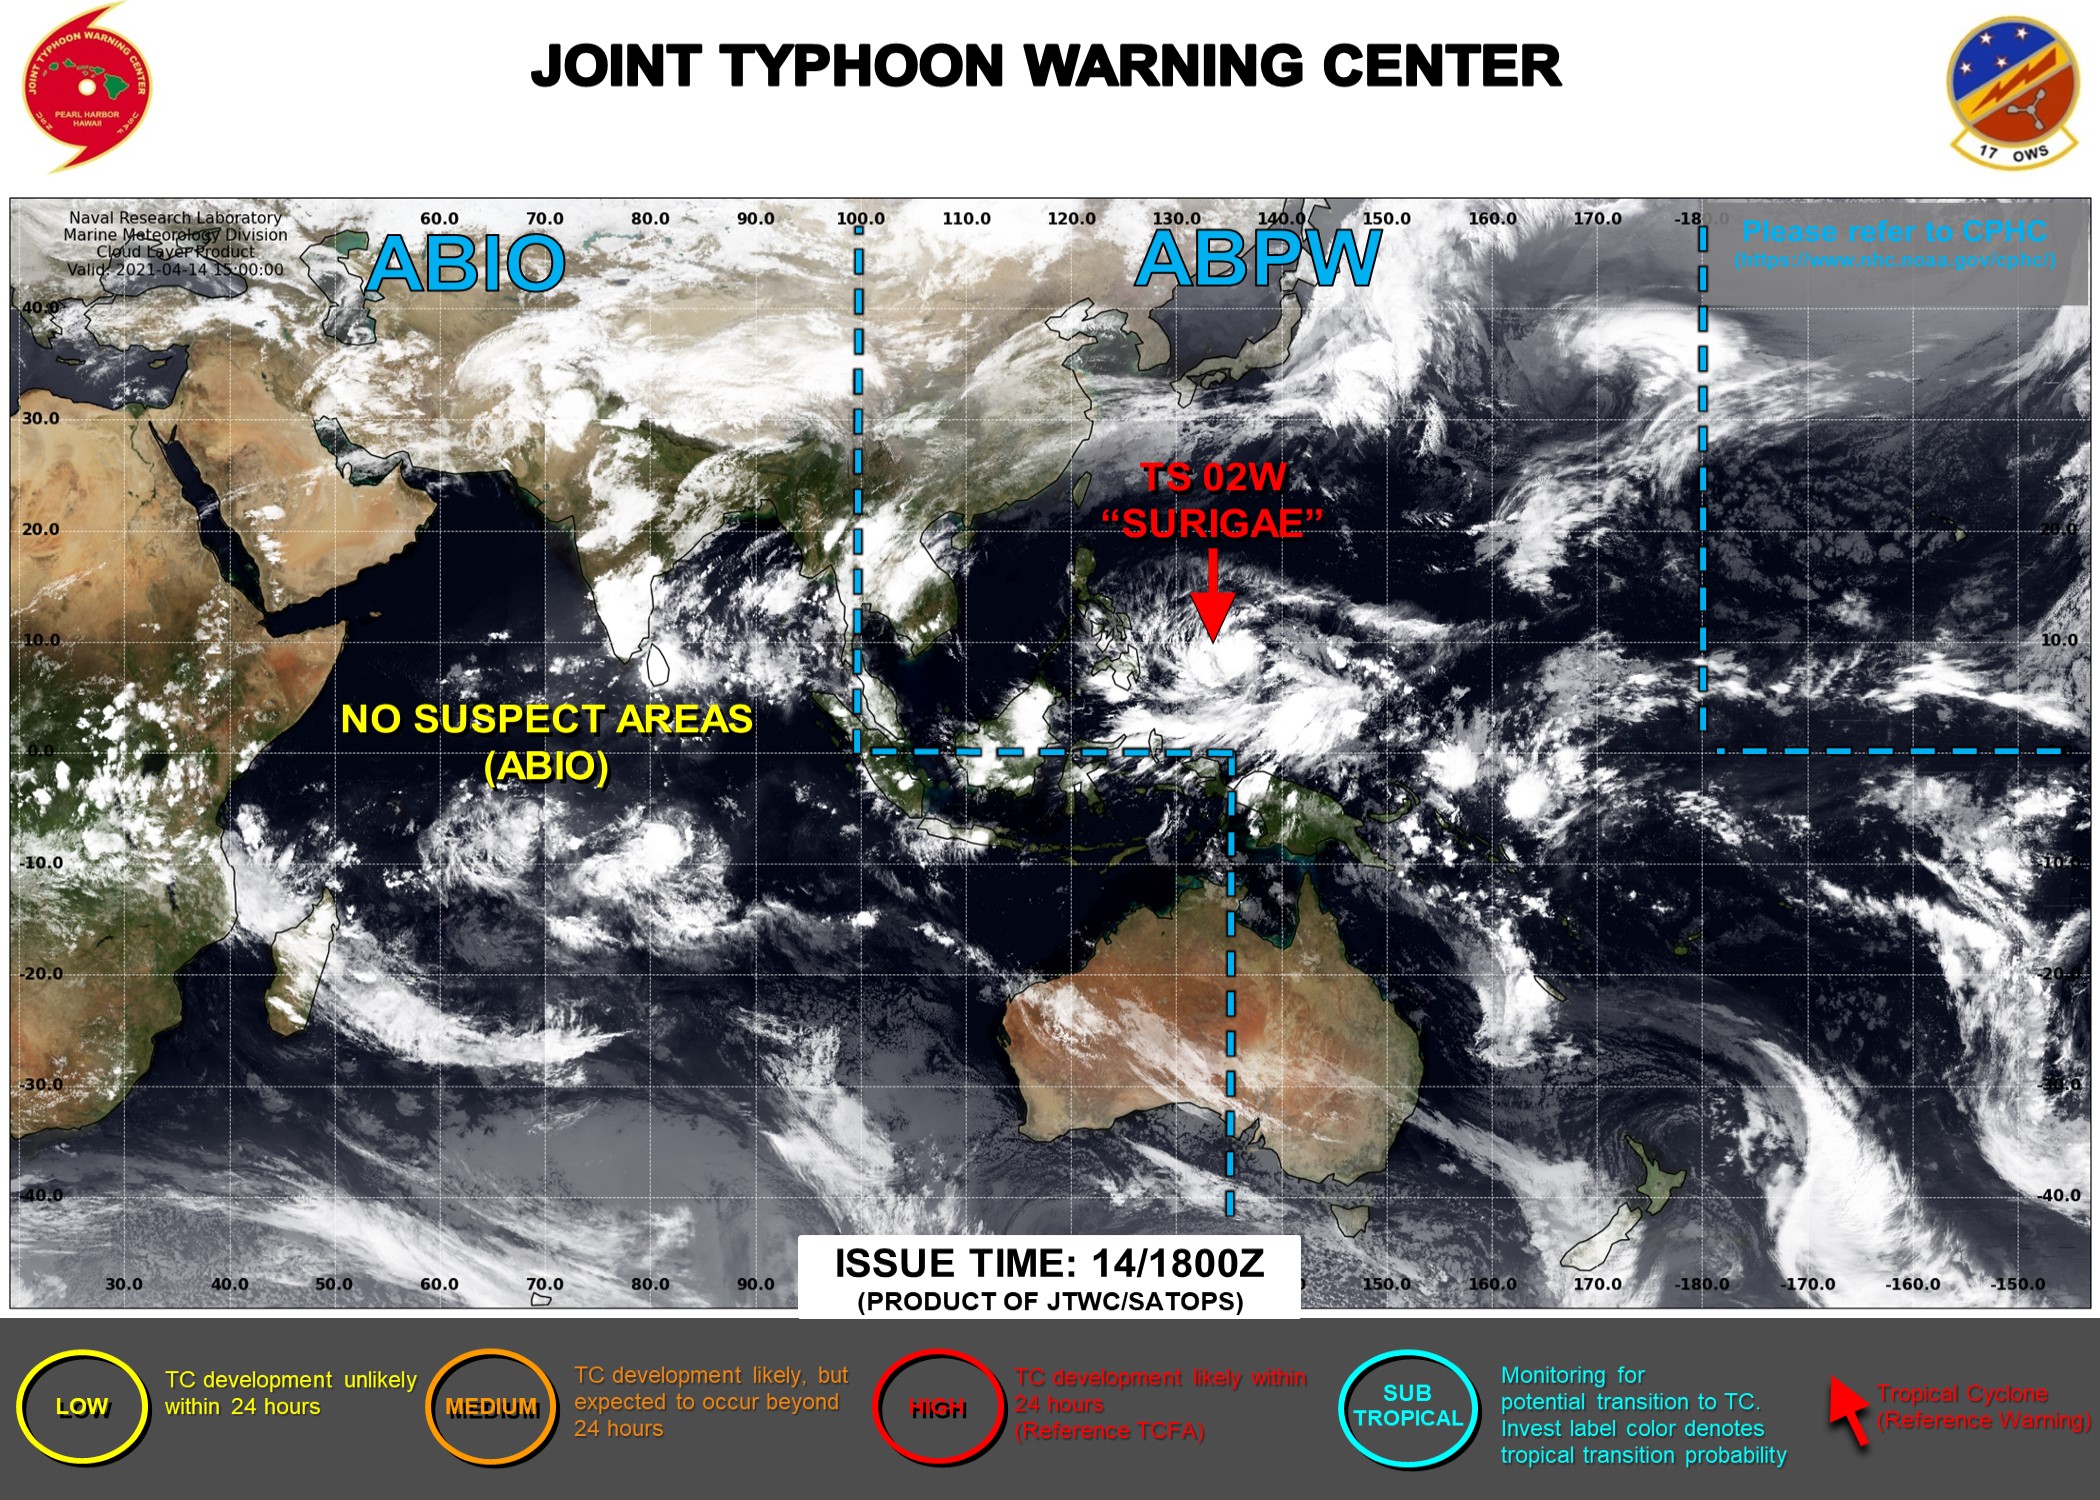 15/03UTC. THE JTWC IS ISSUING 6HOURLY WARNINGS ON 02W(SURIGAE) AND 3HOURLY SATELLITE BULLETINS.